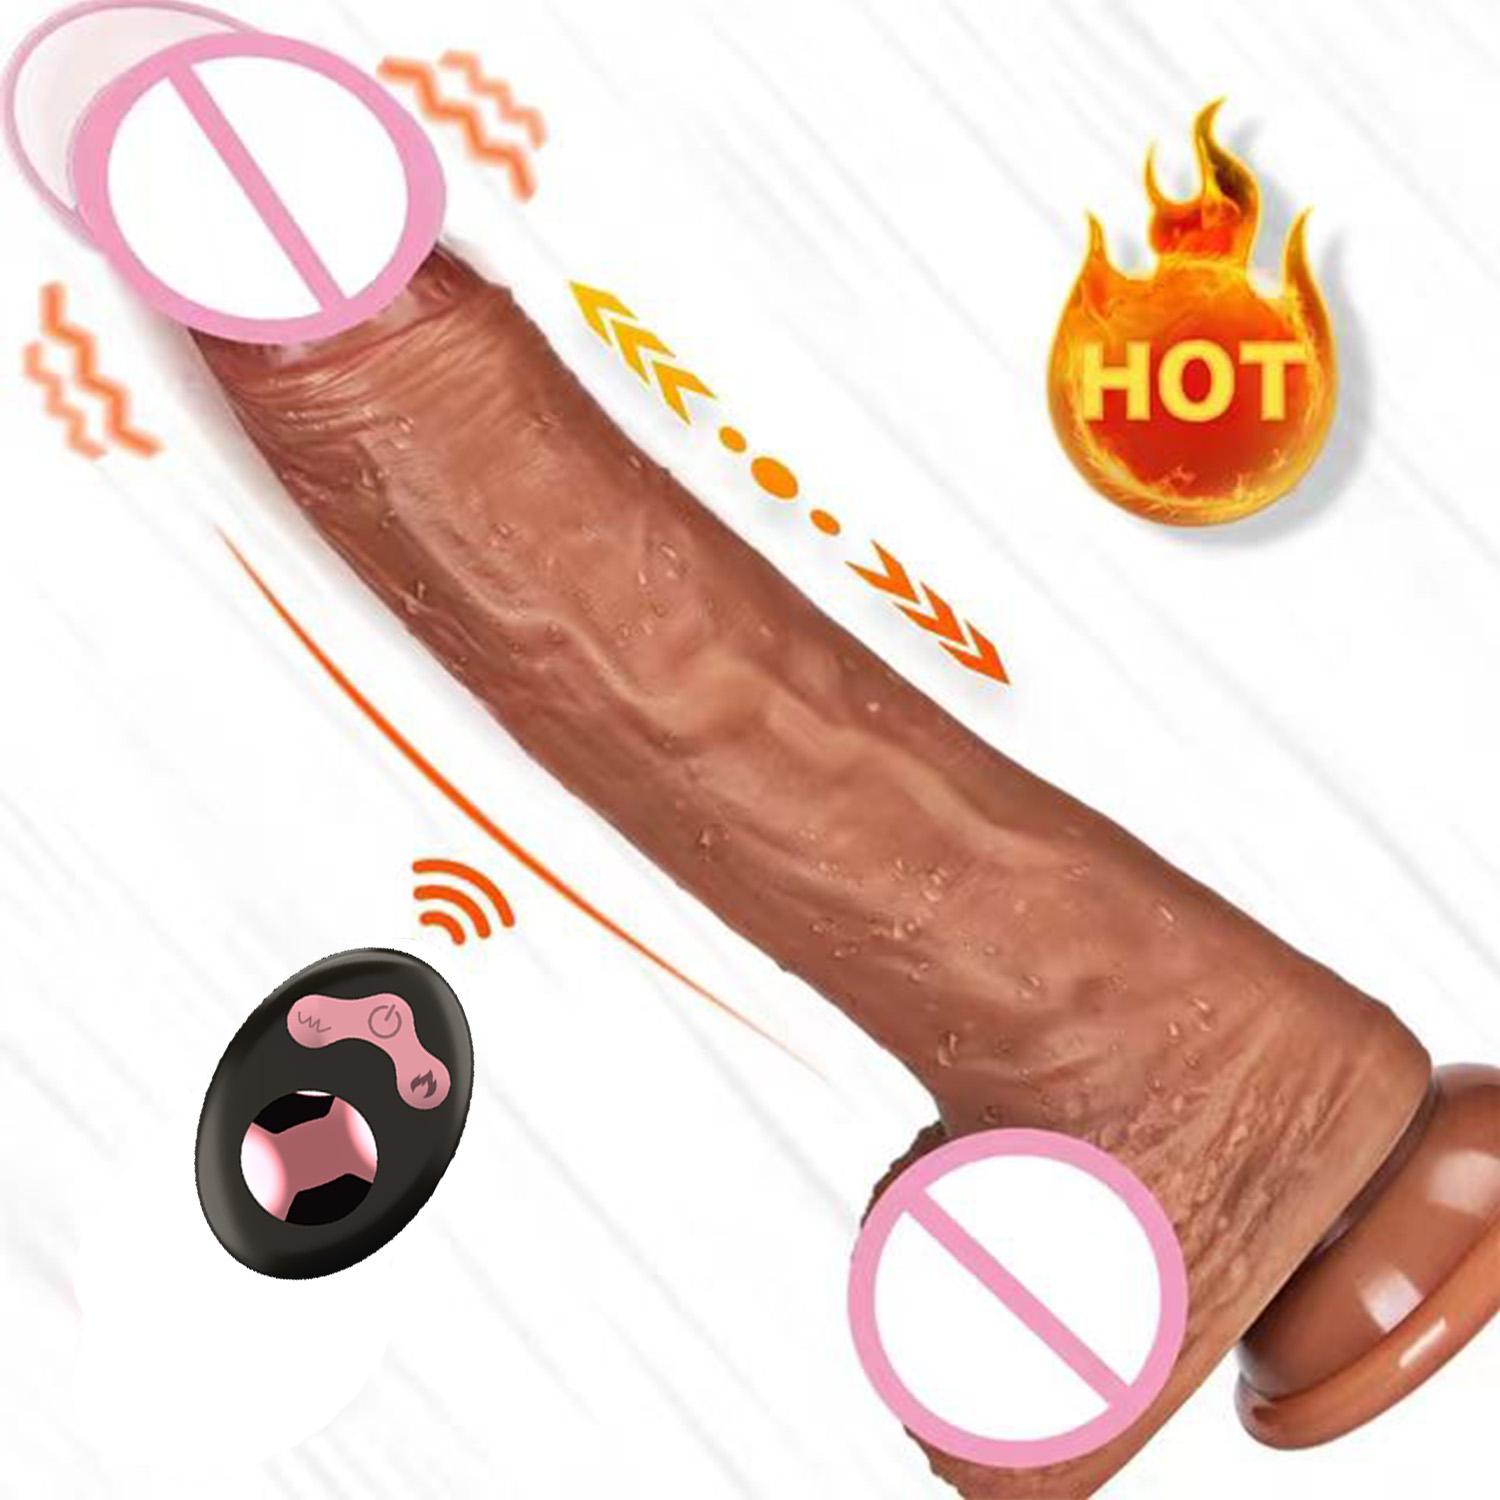 Super Realistic Silicone Dildo Strong Telescopic Heating Vibrator For Women G Spot Massager Big Dick Penis Adult Sex Erotic Toy